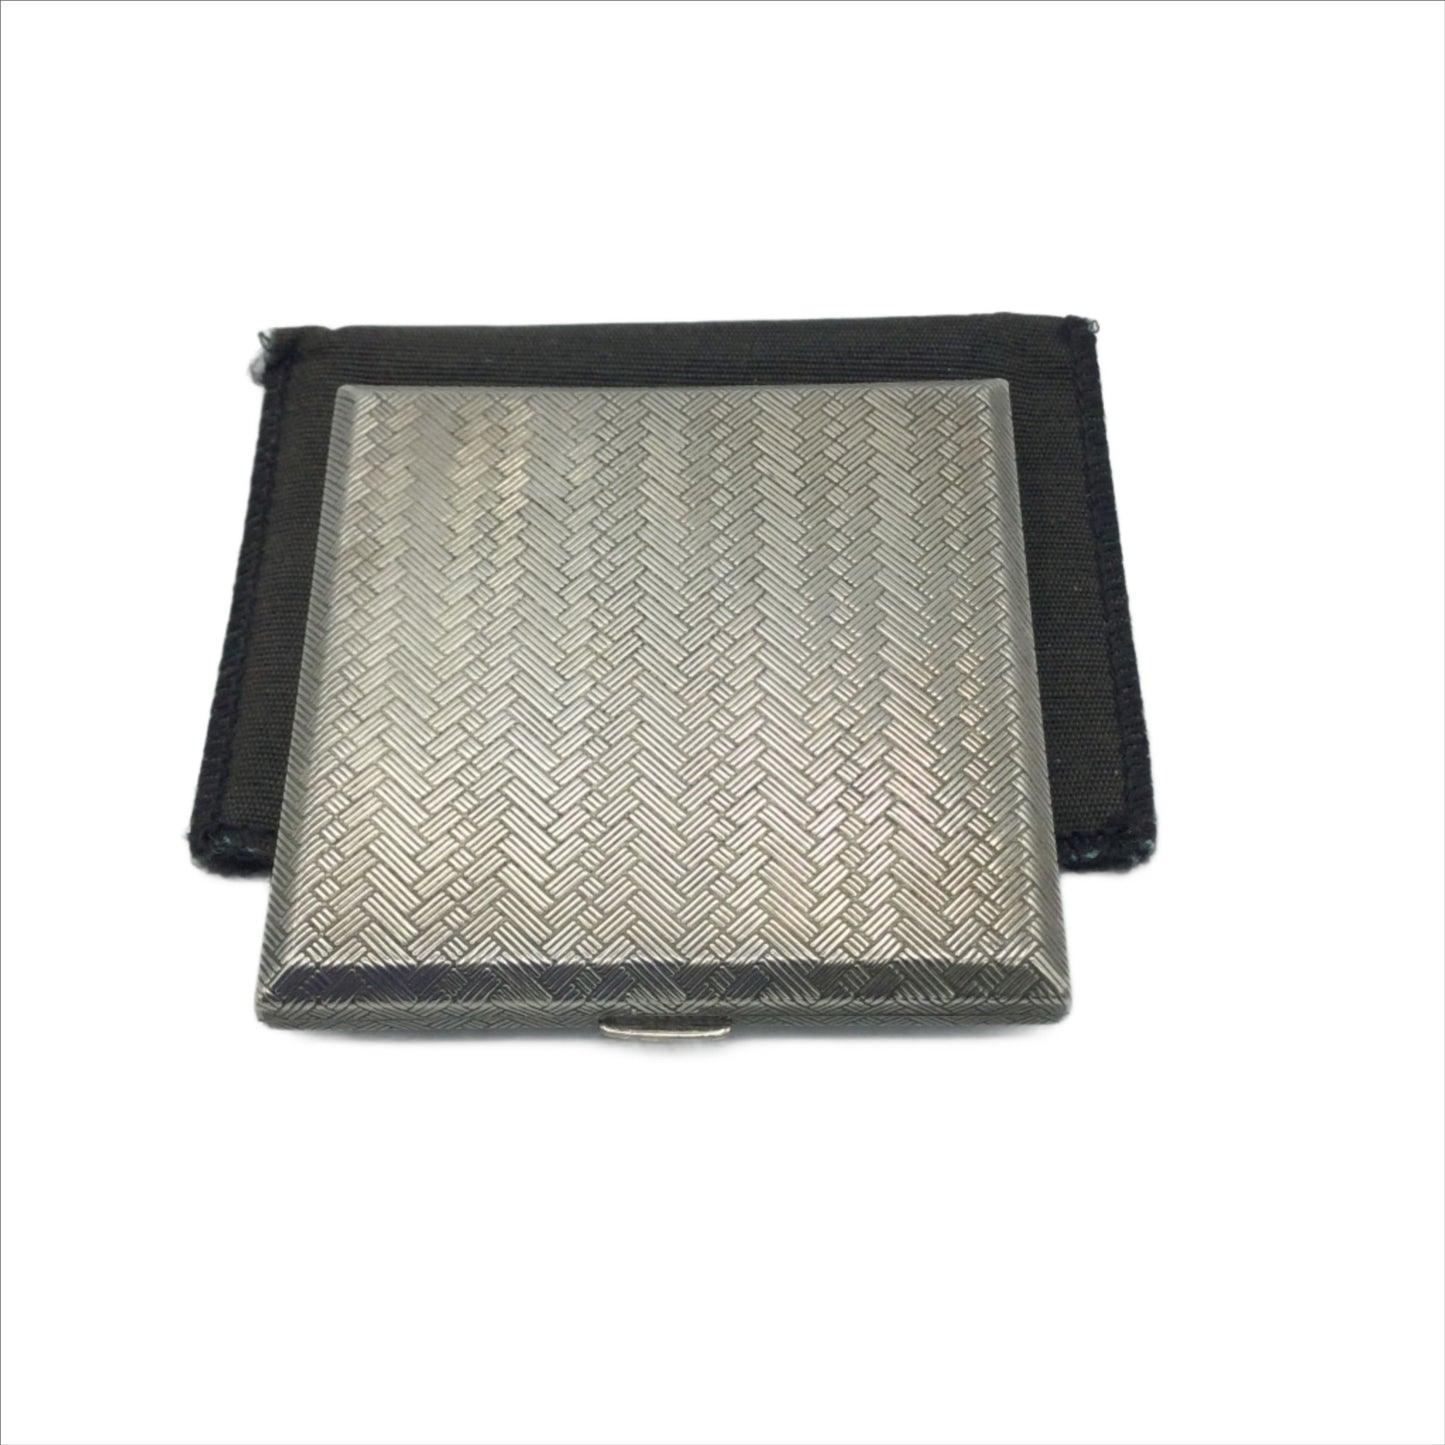 A silver coloured square compact with a woven pattern to the lid. It is sitting on a black bag.